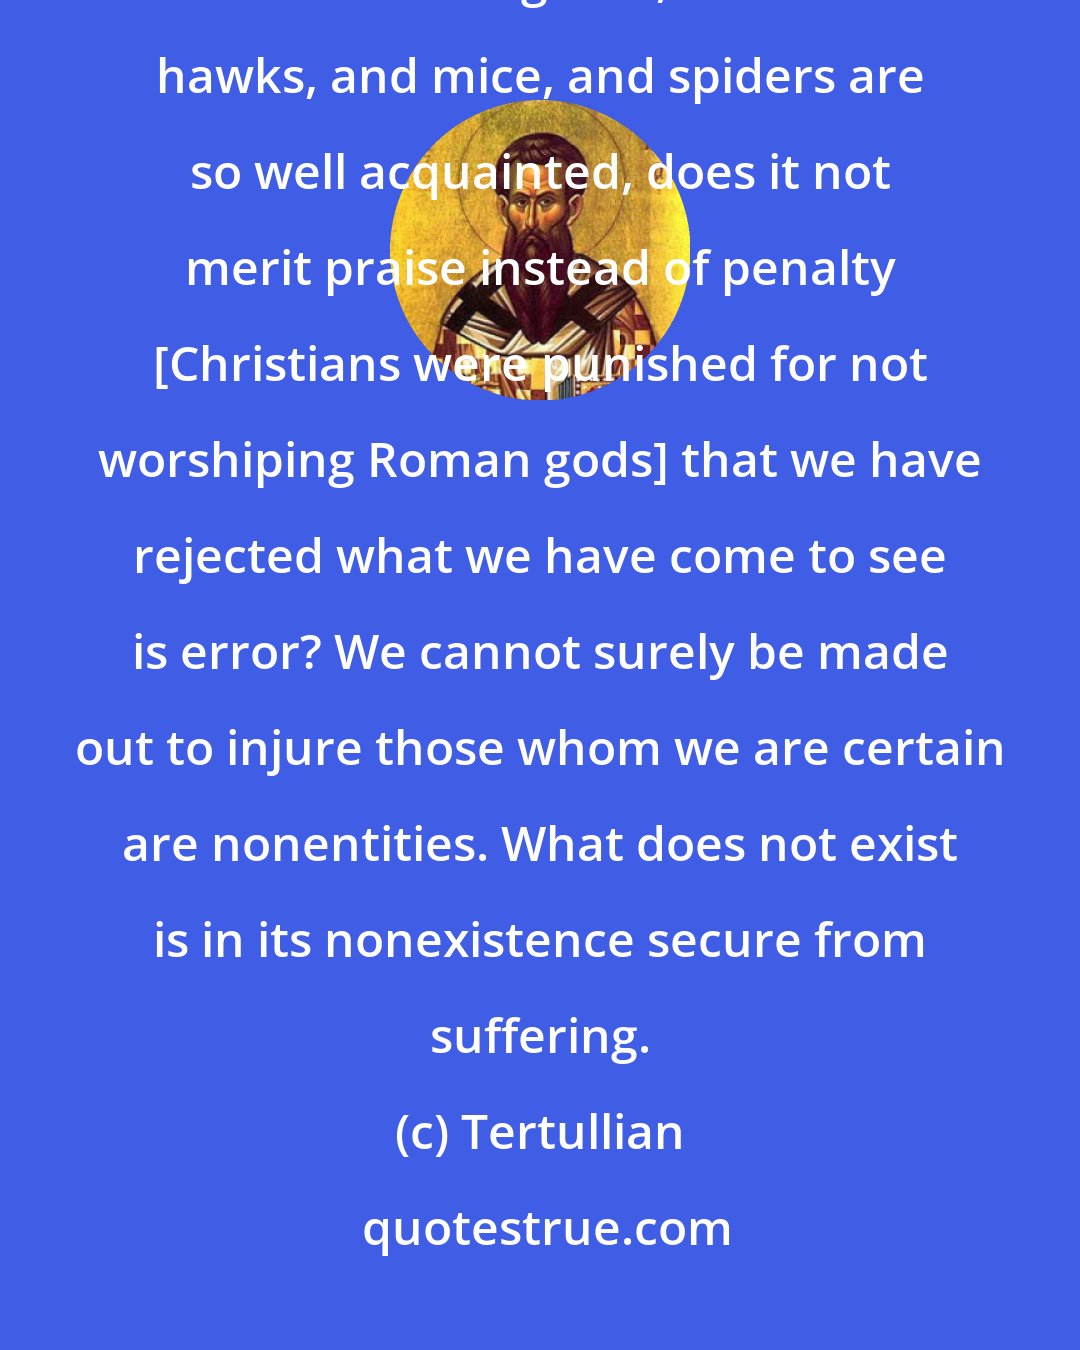 Tertullian: If we refuse our homage to statues and frigid images, the very counterpart of their dead originals, with which hawks, and mice, and spiders are so well acquainted, does it not merit praise instead of penalty [Christians were punished for not worshiping Roman gods] that we have rejected what we have come to see is error? We cannot surely be made out to injure those whom we are certain are nonentities. What does not exist is in its nonexistence secure from suffering.